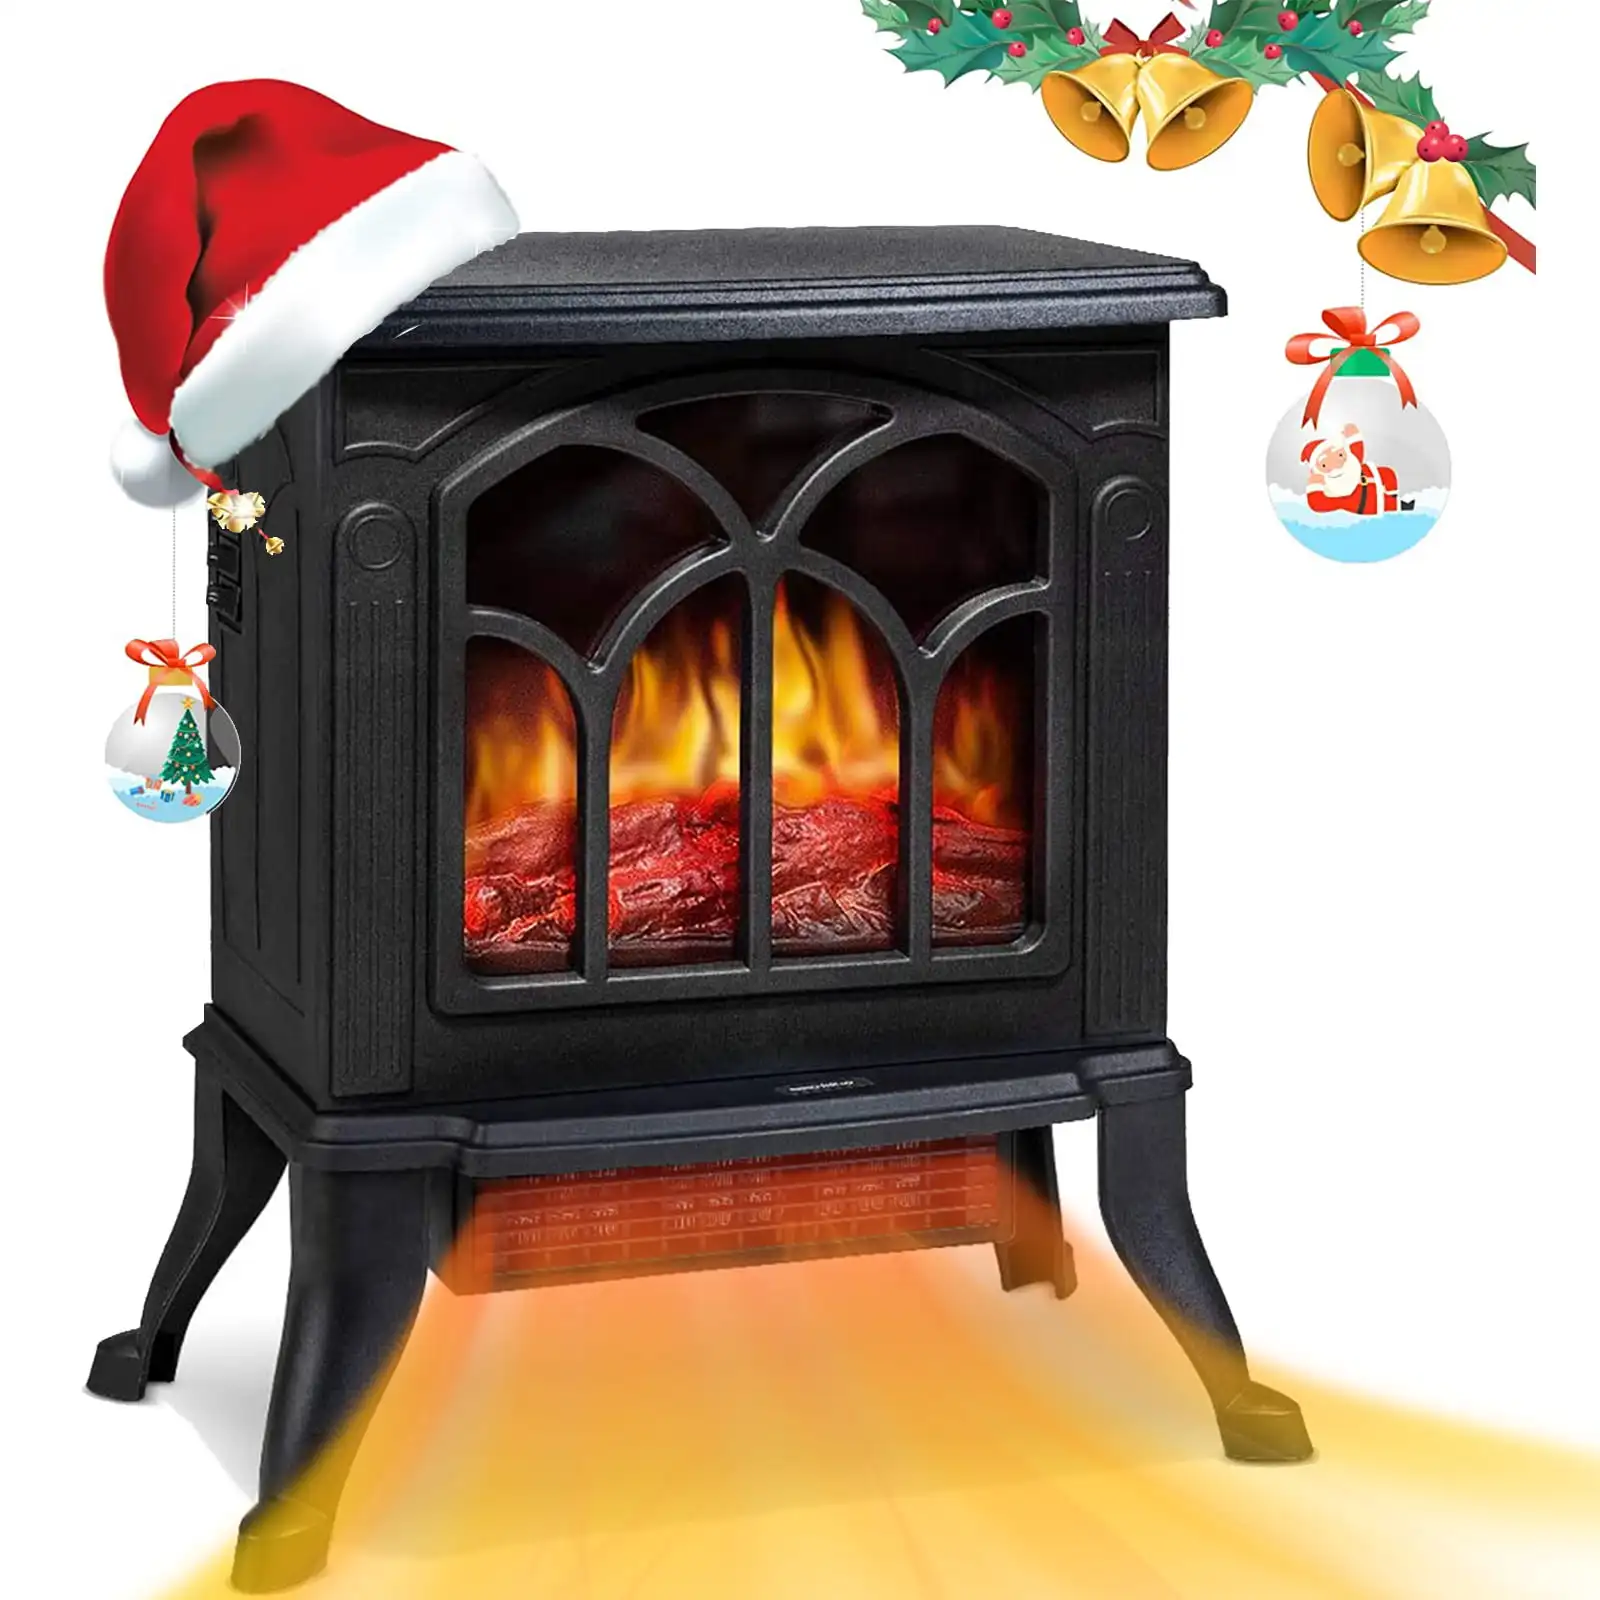 SKONYON Electric Fireplace Heater Infrared Space Heater with 3D Flame Effect Black